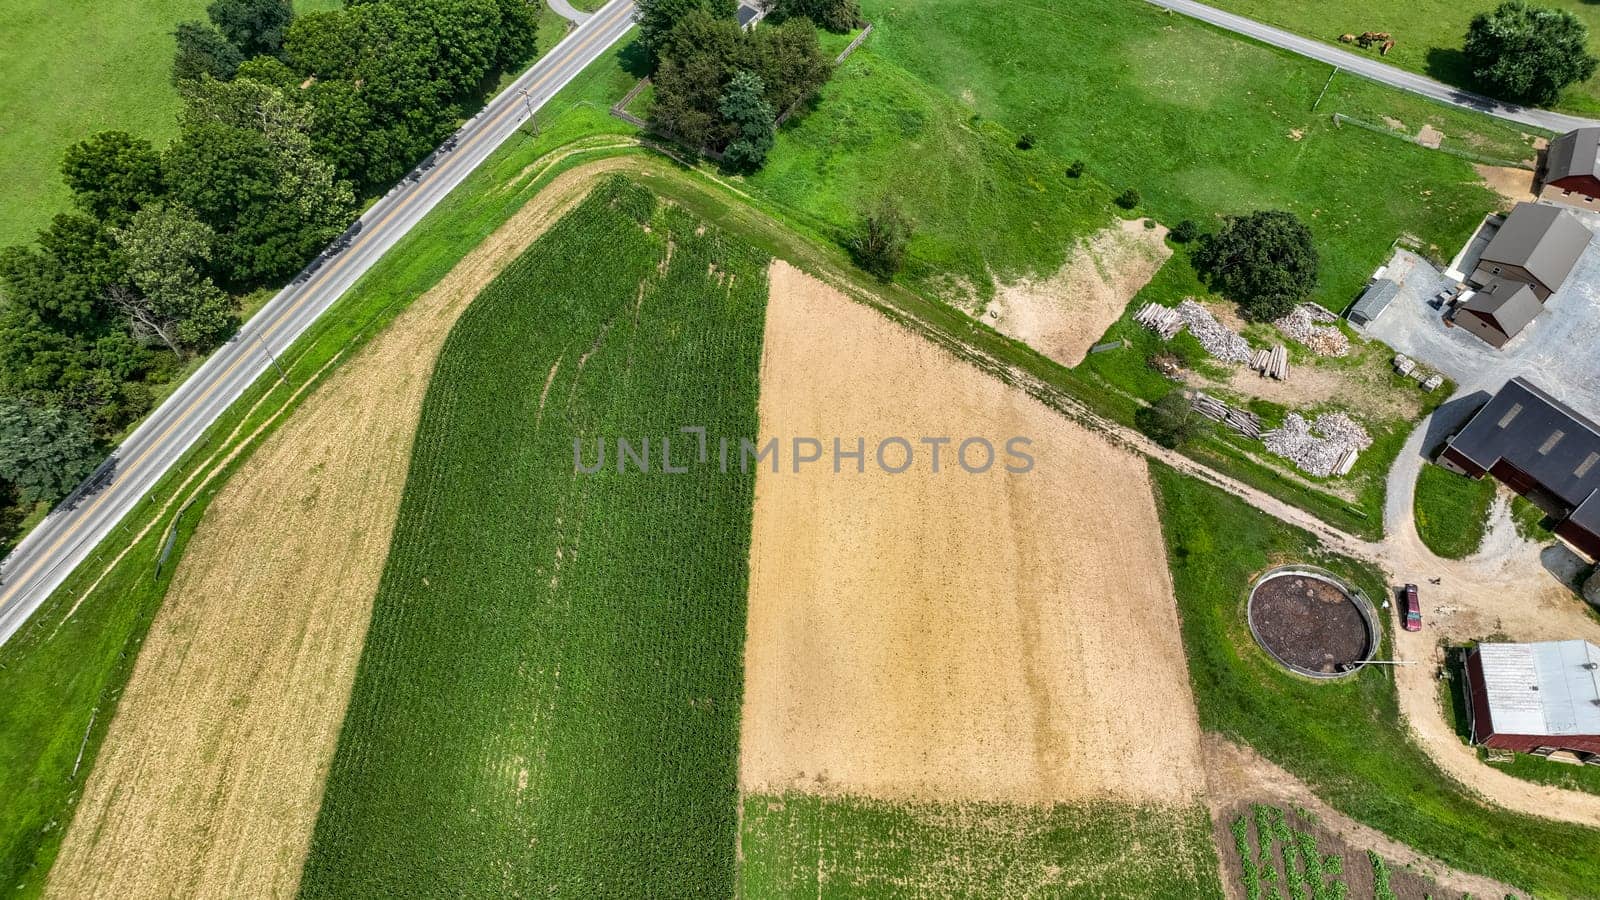 An Aerial View of a Farm with Green Fields and Crops